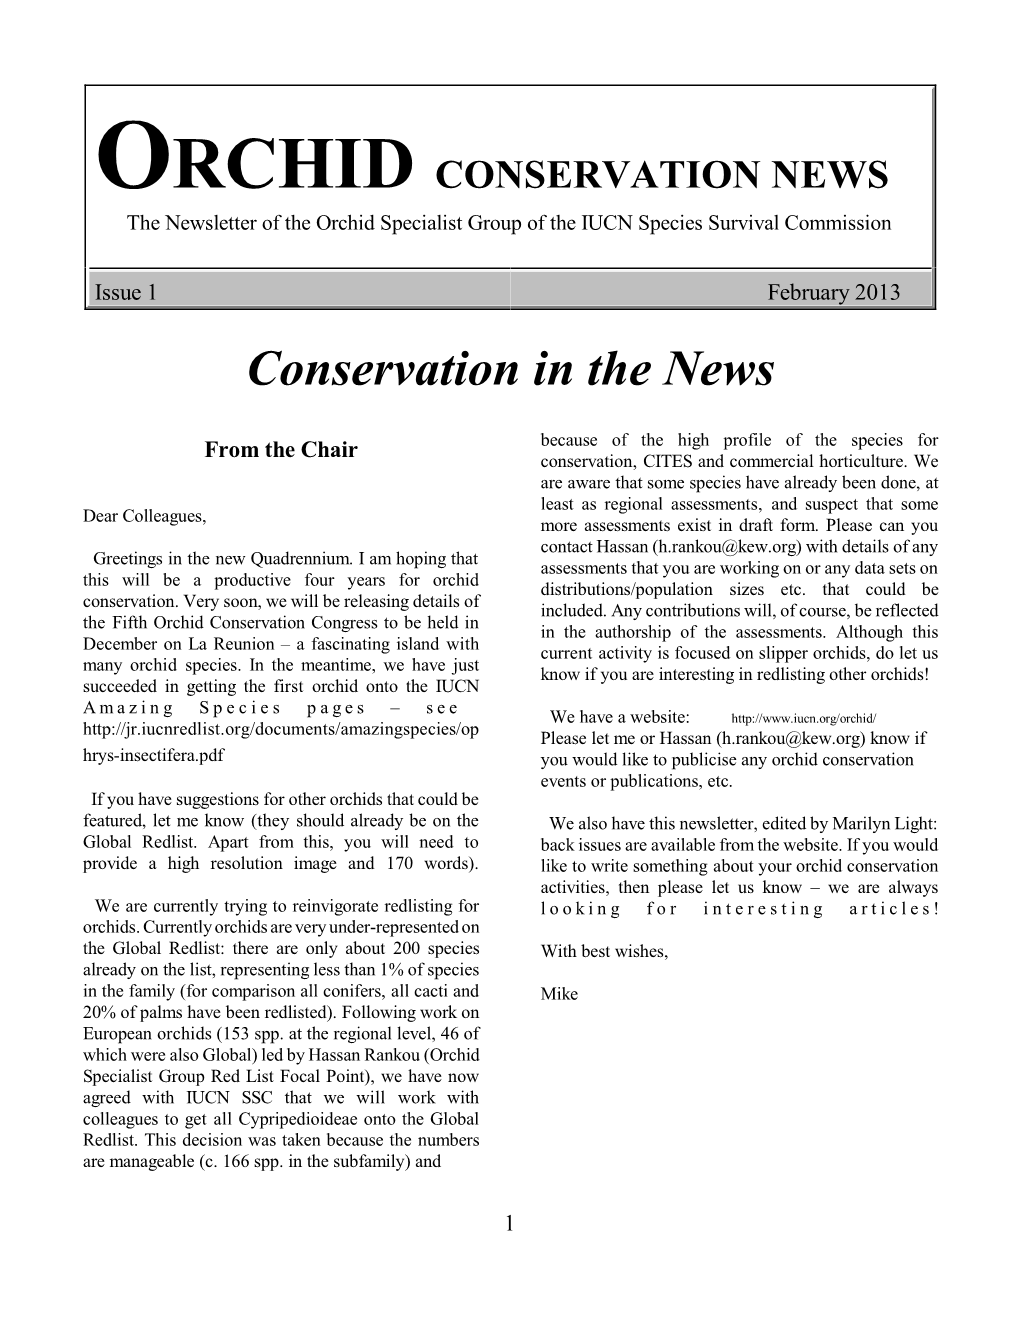 Conservation in the News